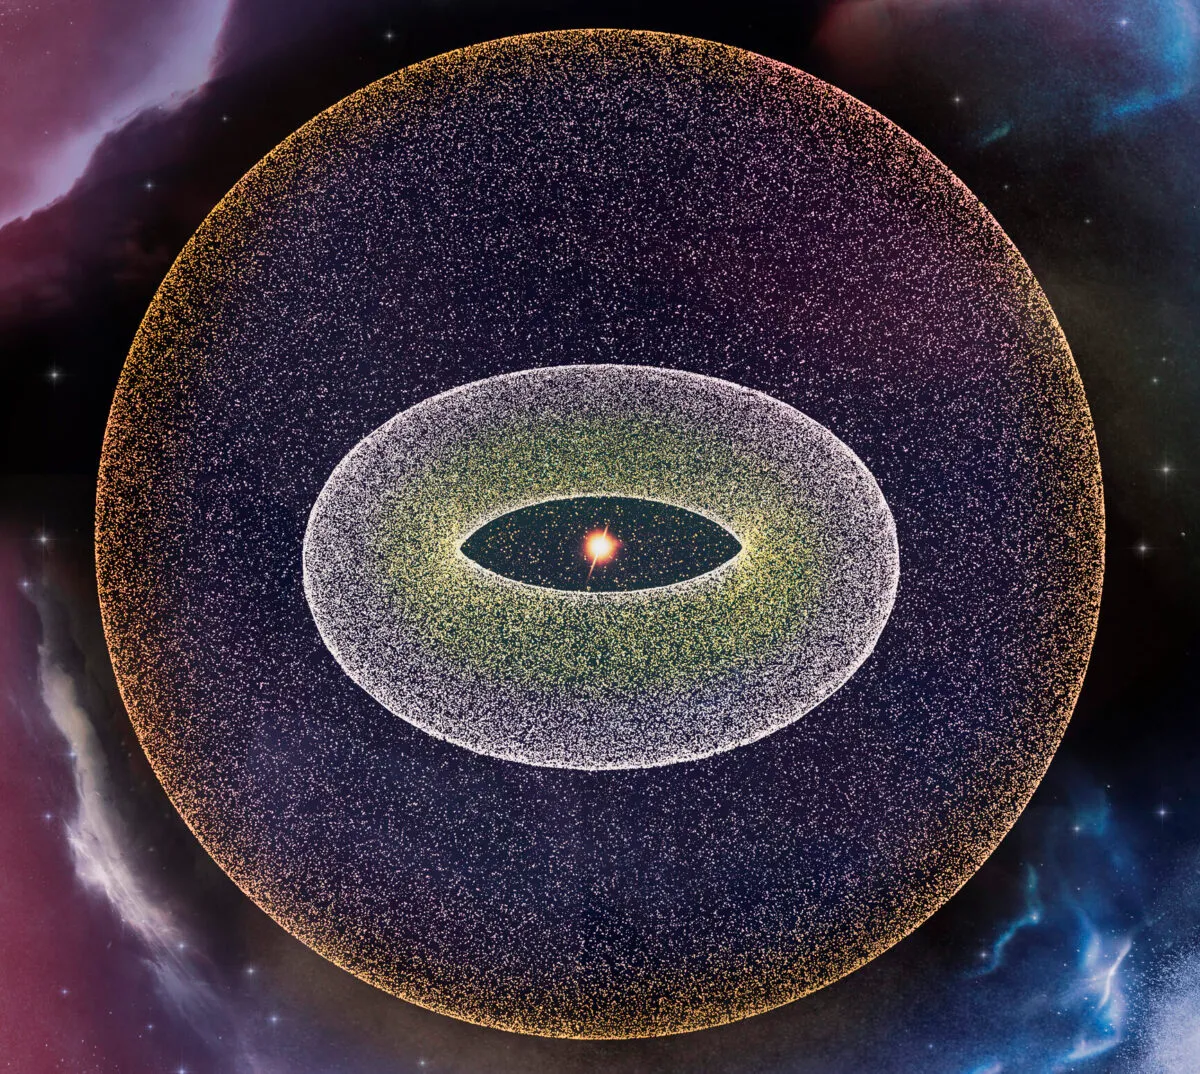 An artist's illustration of the Oort Cloud. Credit: Naeblys / Getty Images